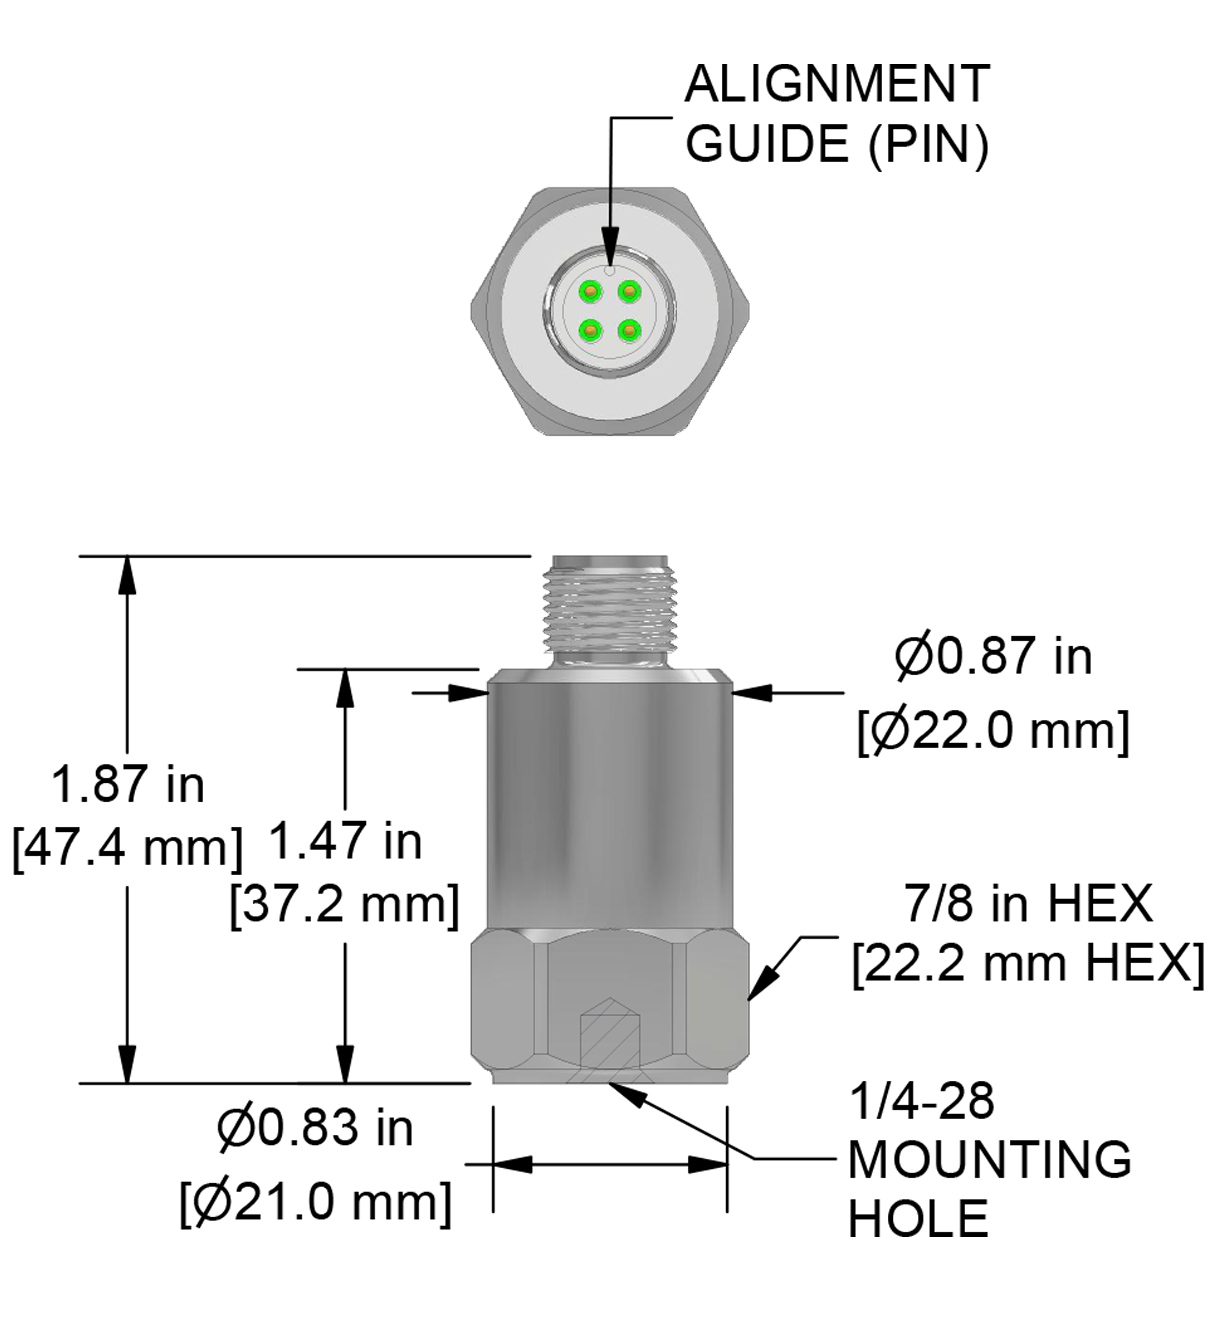 A drawing showing the dimensions and pin configuration of a CTC AC133-M12A industrial accelerometer.